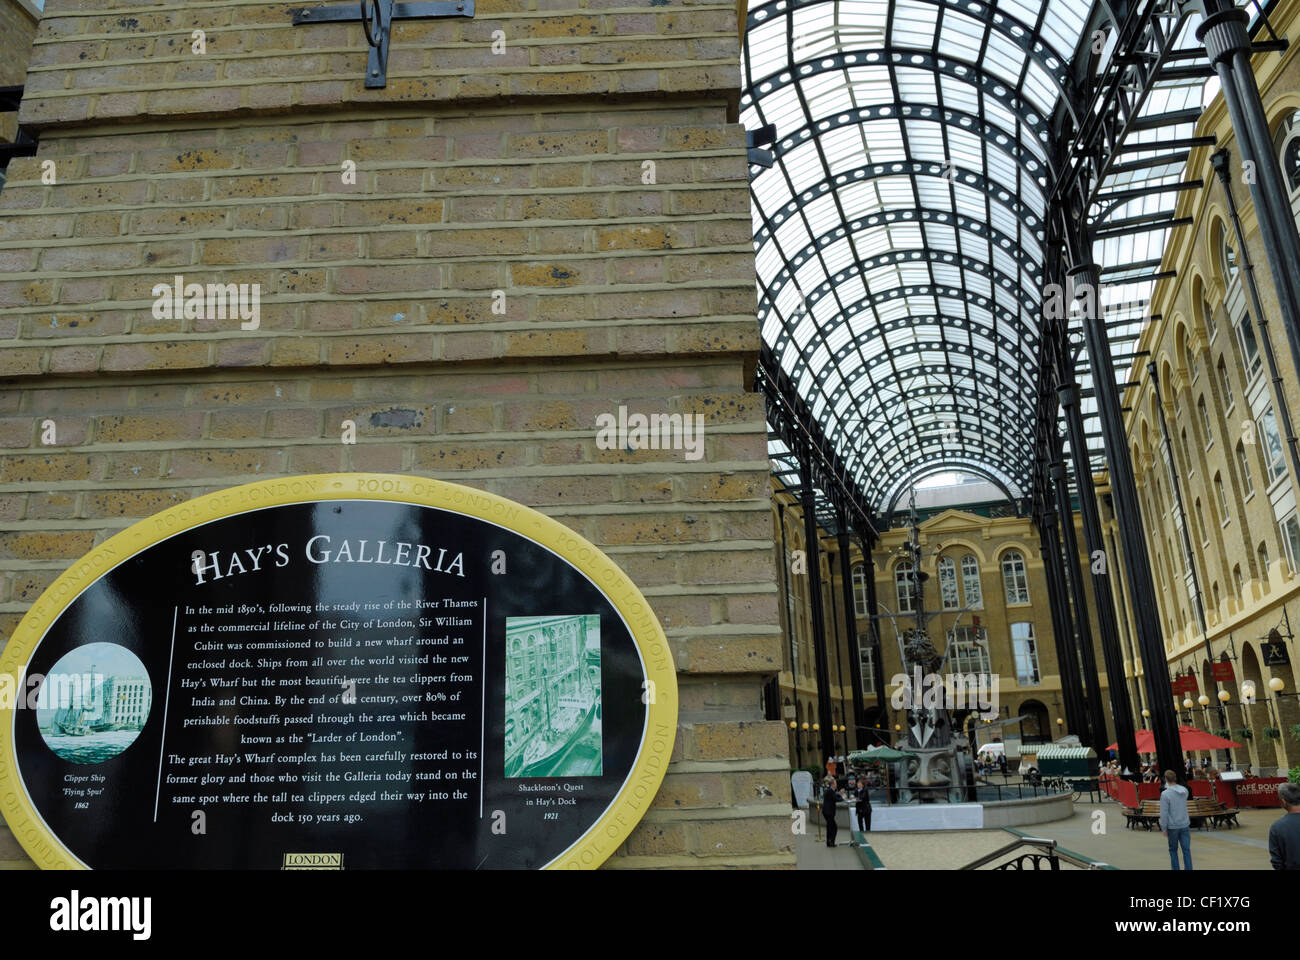 Hay's Galleria on London's south bank is a place to eat, shop and relax. It is a conversion of a famous London wharf that took d Stock Photo